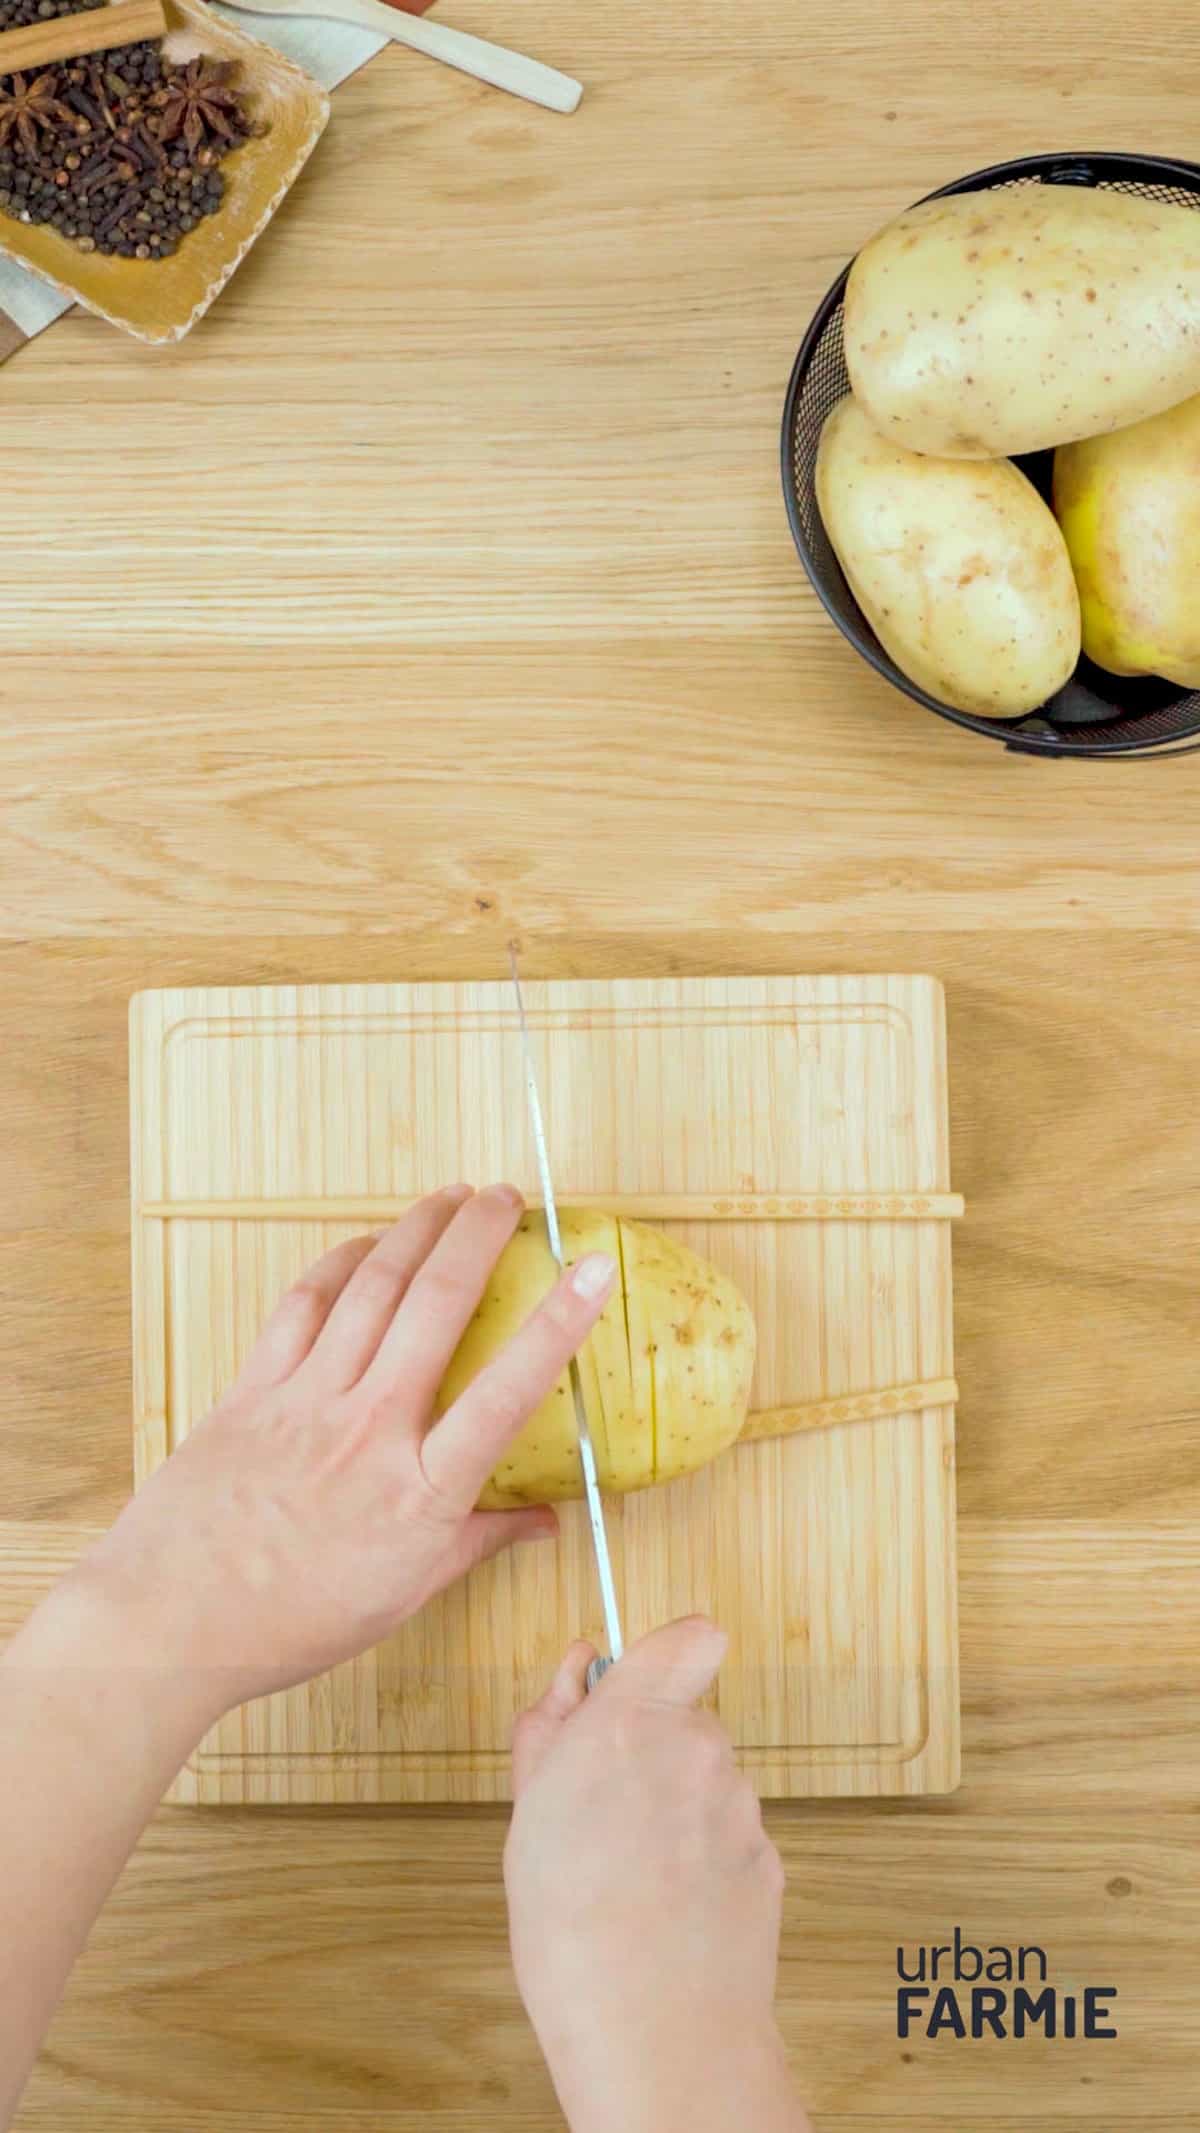 An image of a potato being slit on a chopping board.